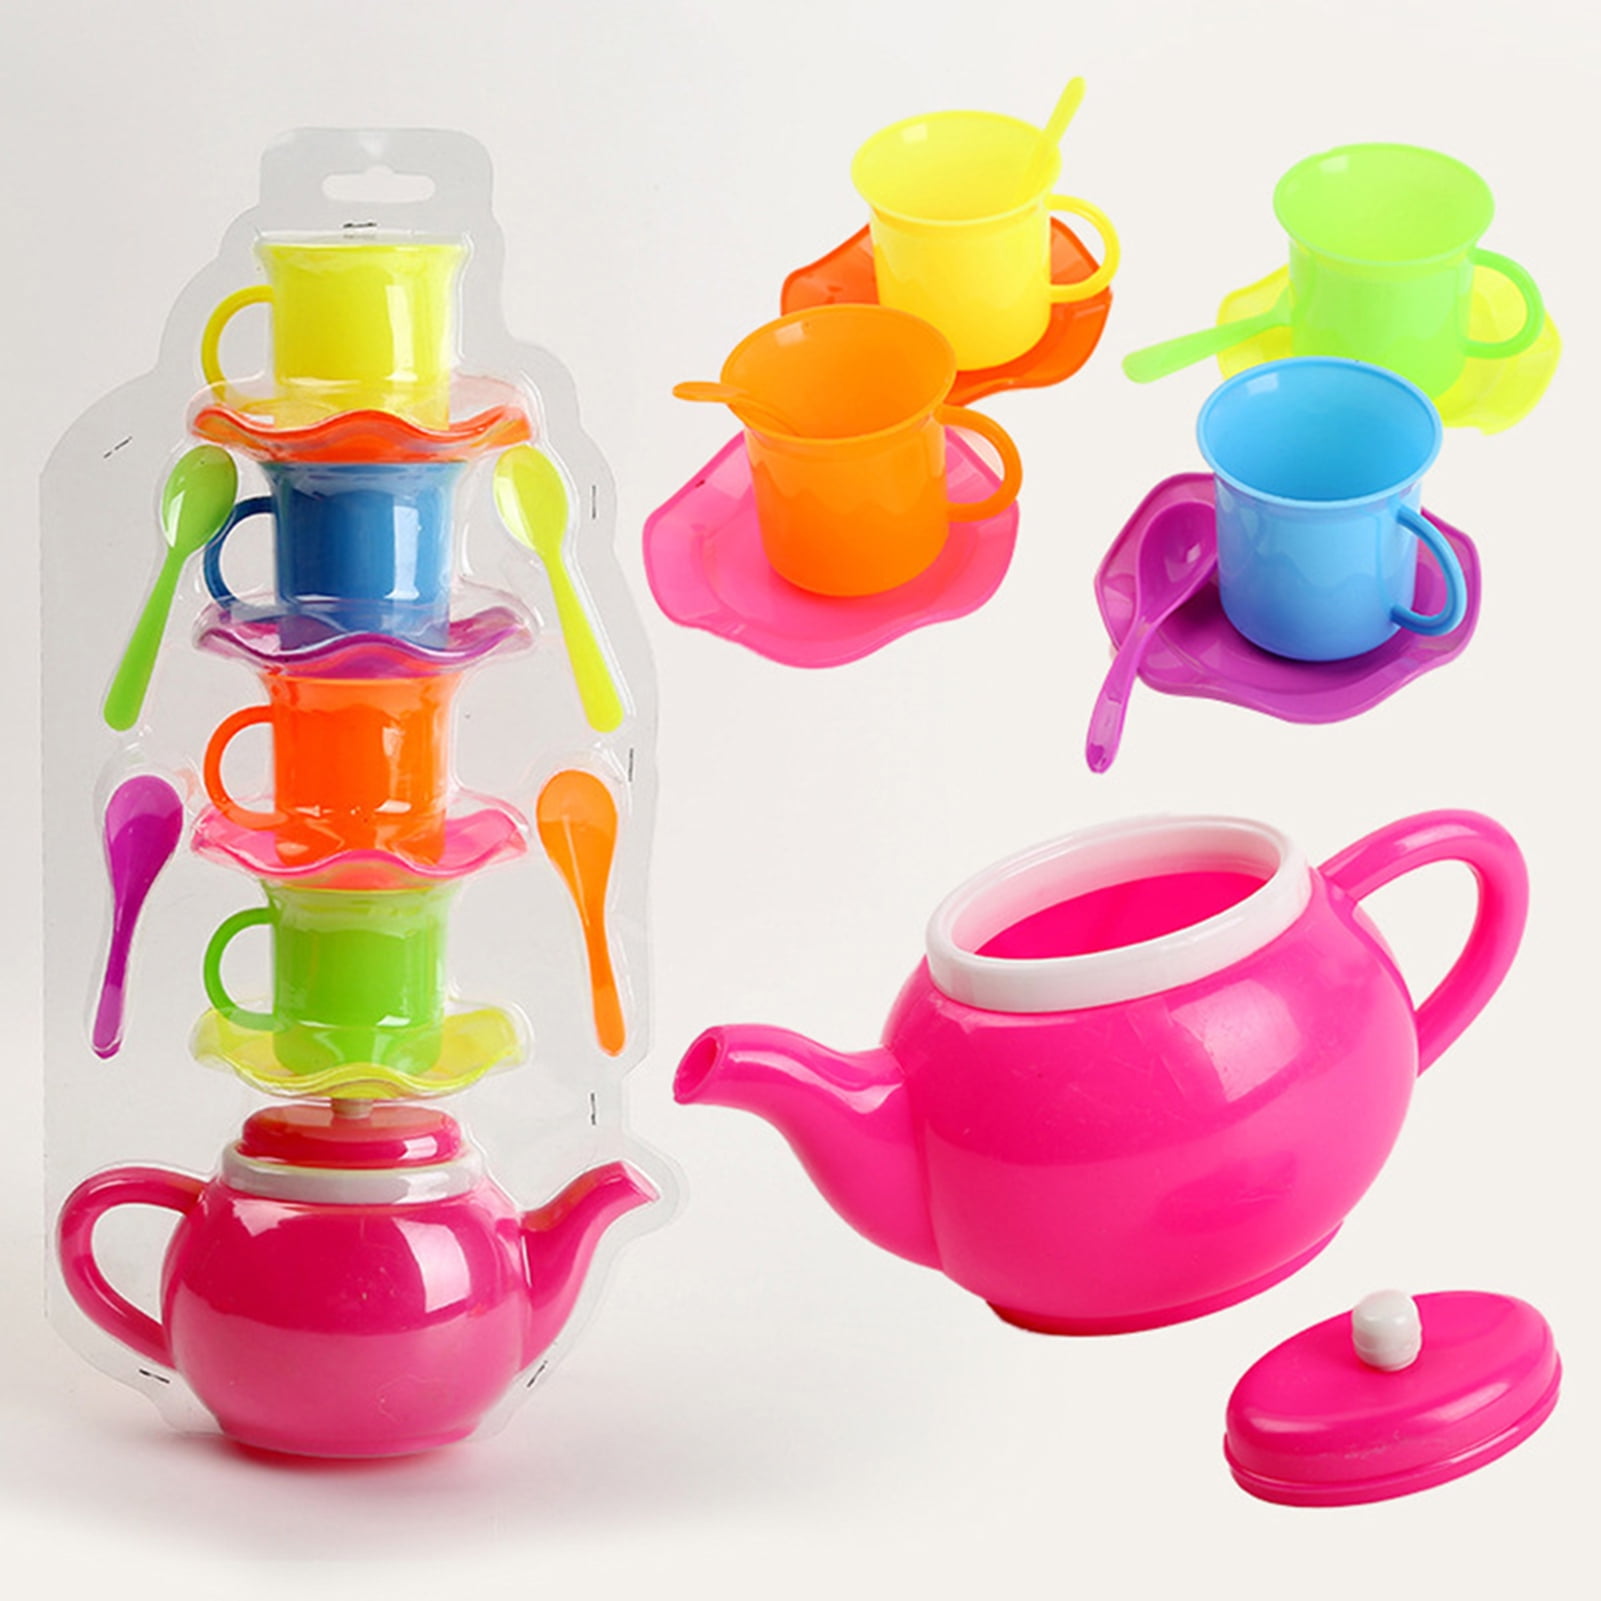 15 Piece Tea Set Pretend Playing For Preschool 2 Years Old 